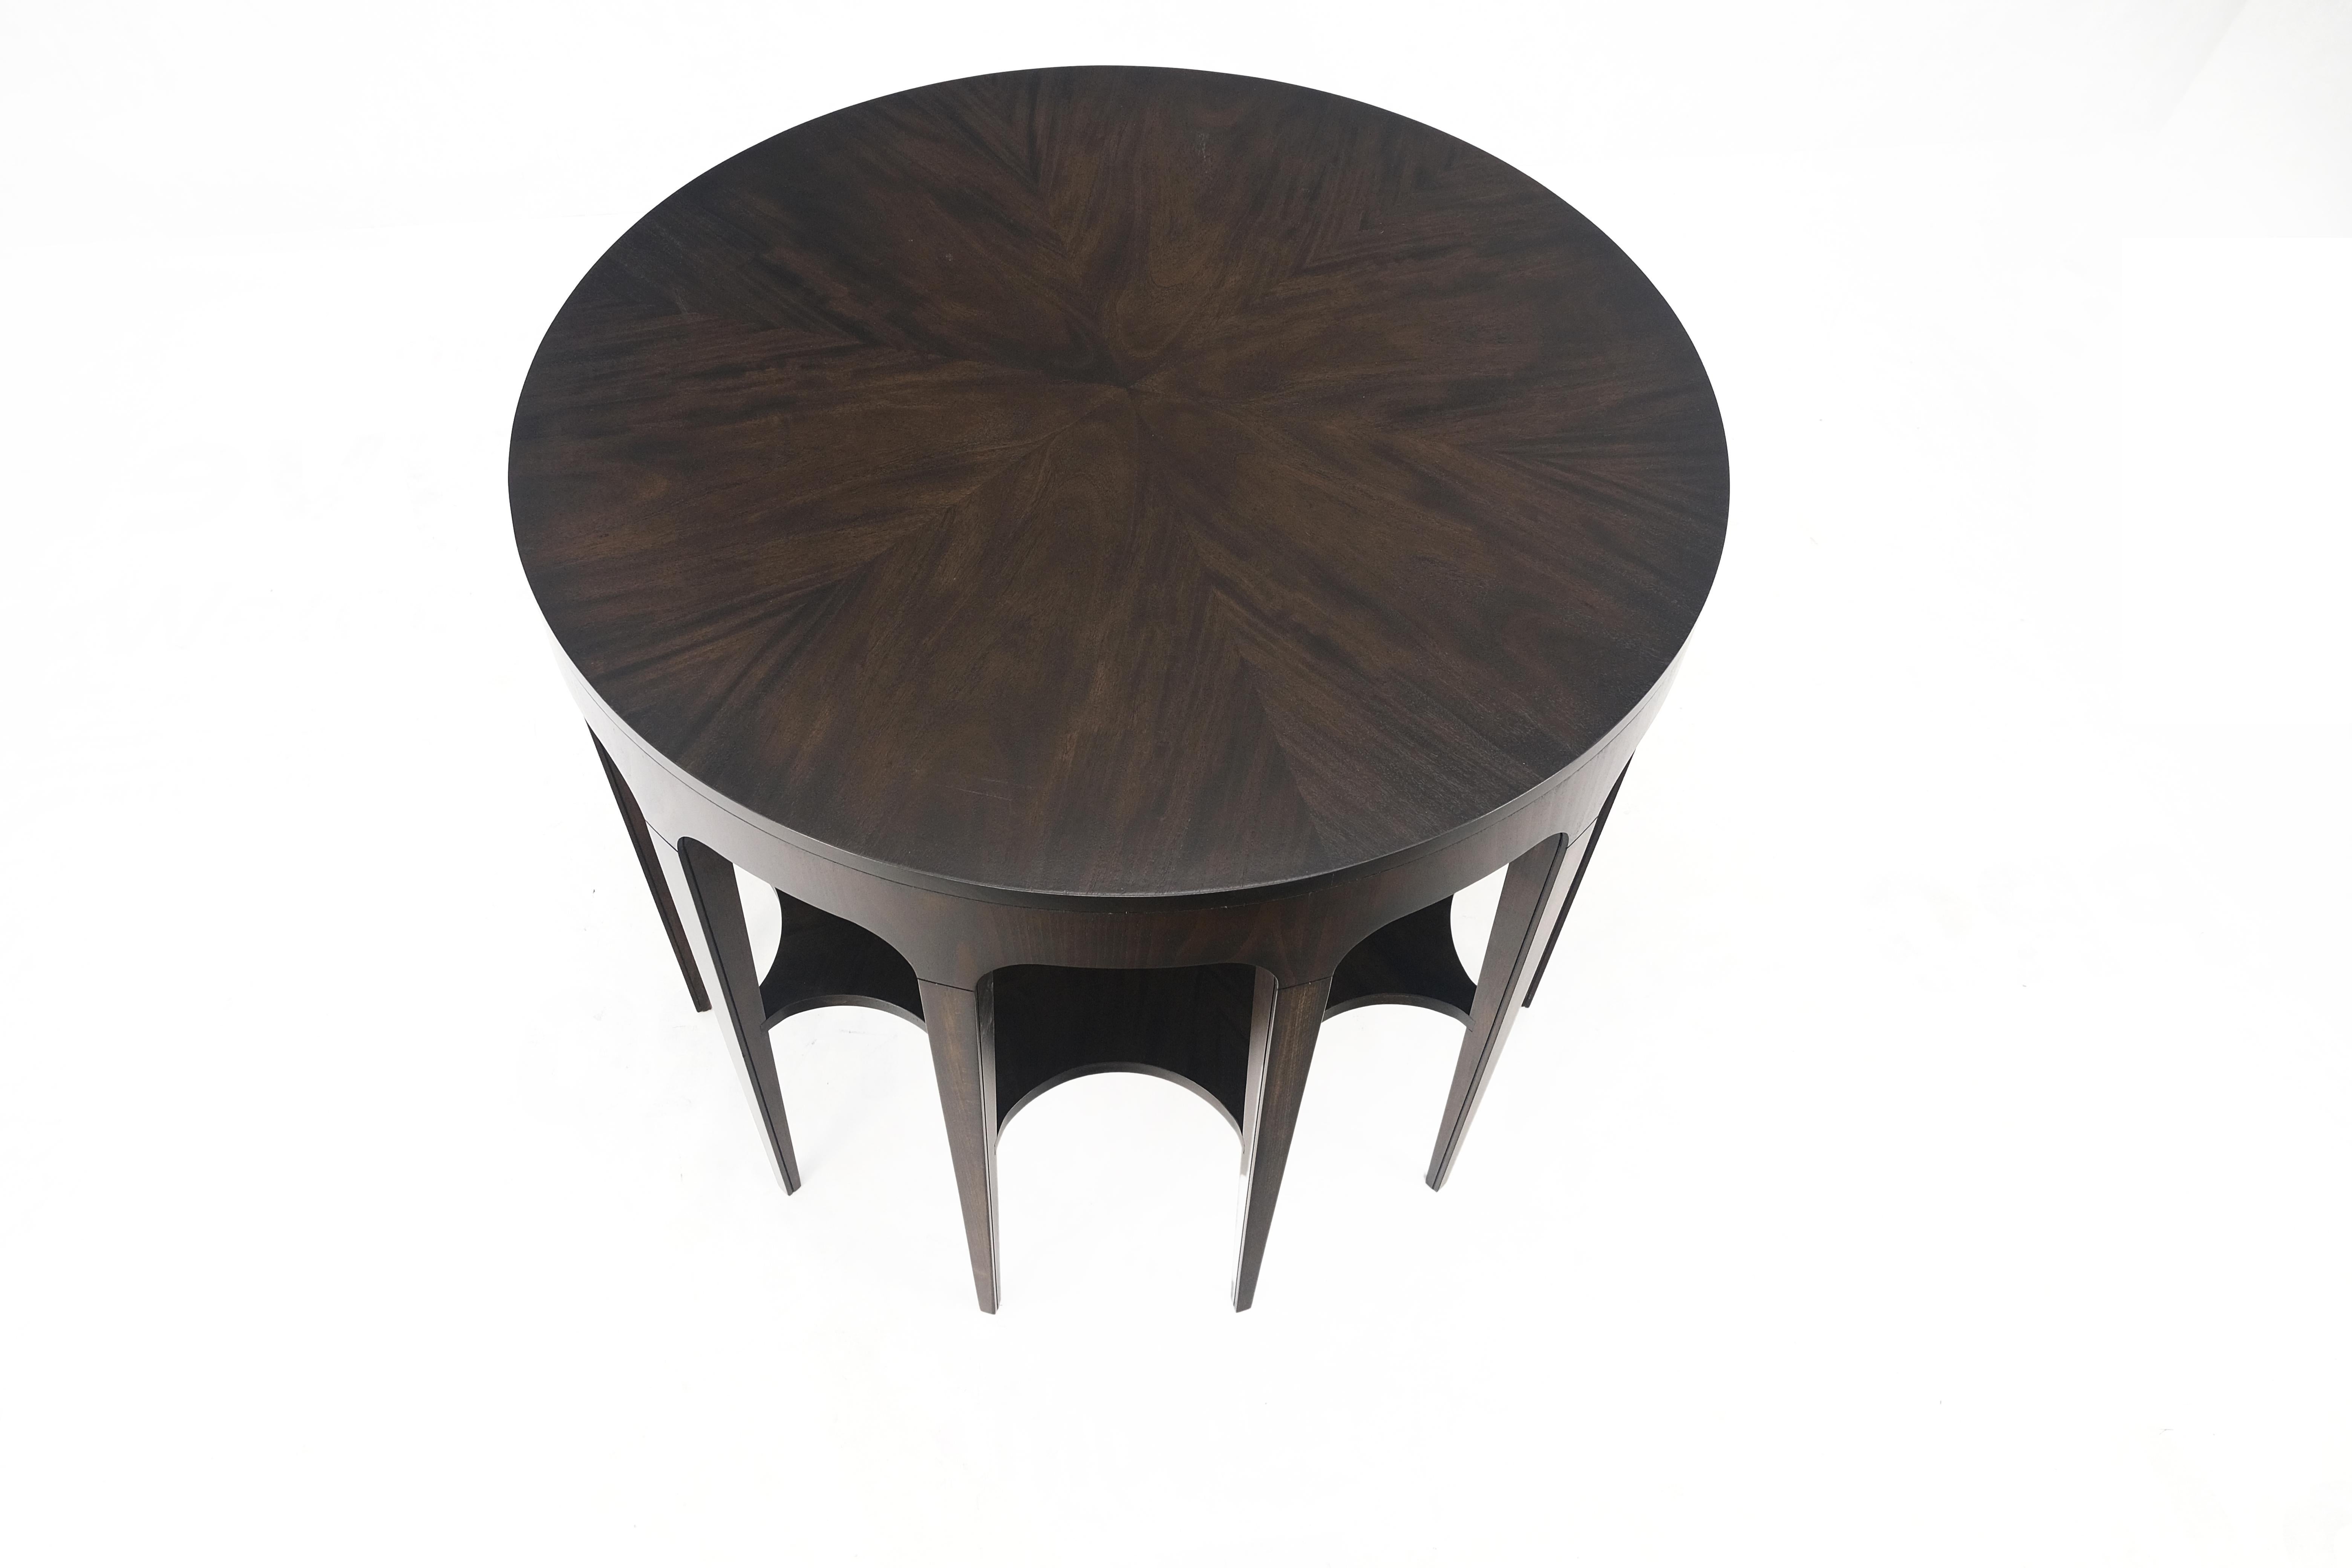 Lacquered Espresso Mahogany 12 Legged Round Center Library 3' Diameter Table Stand MINT! For Sale